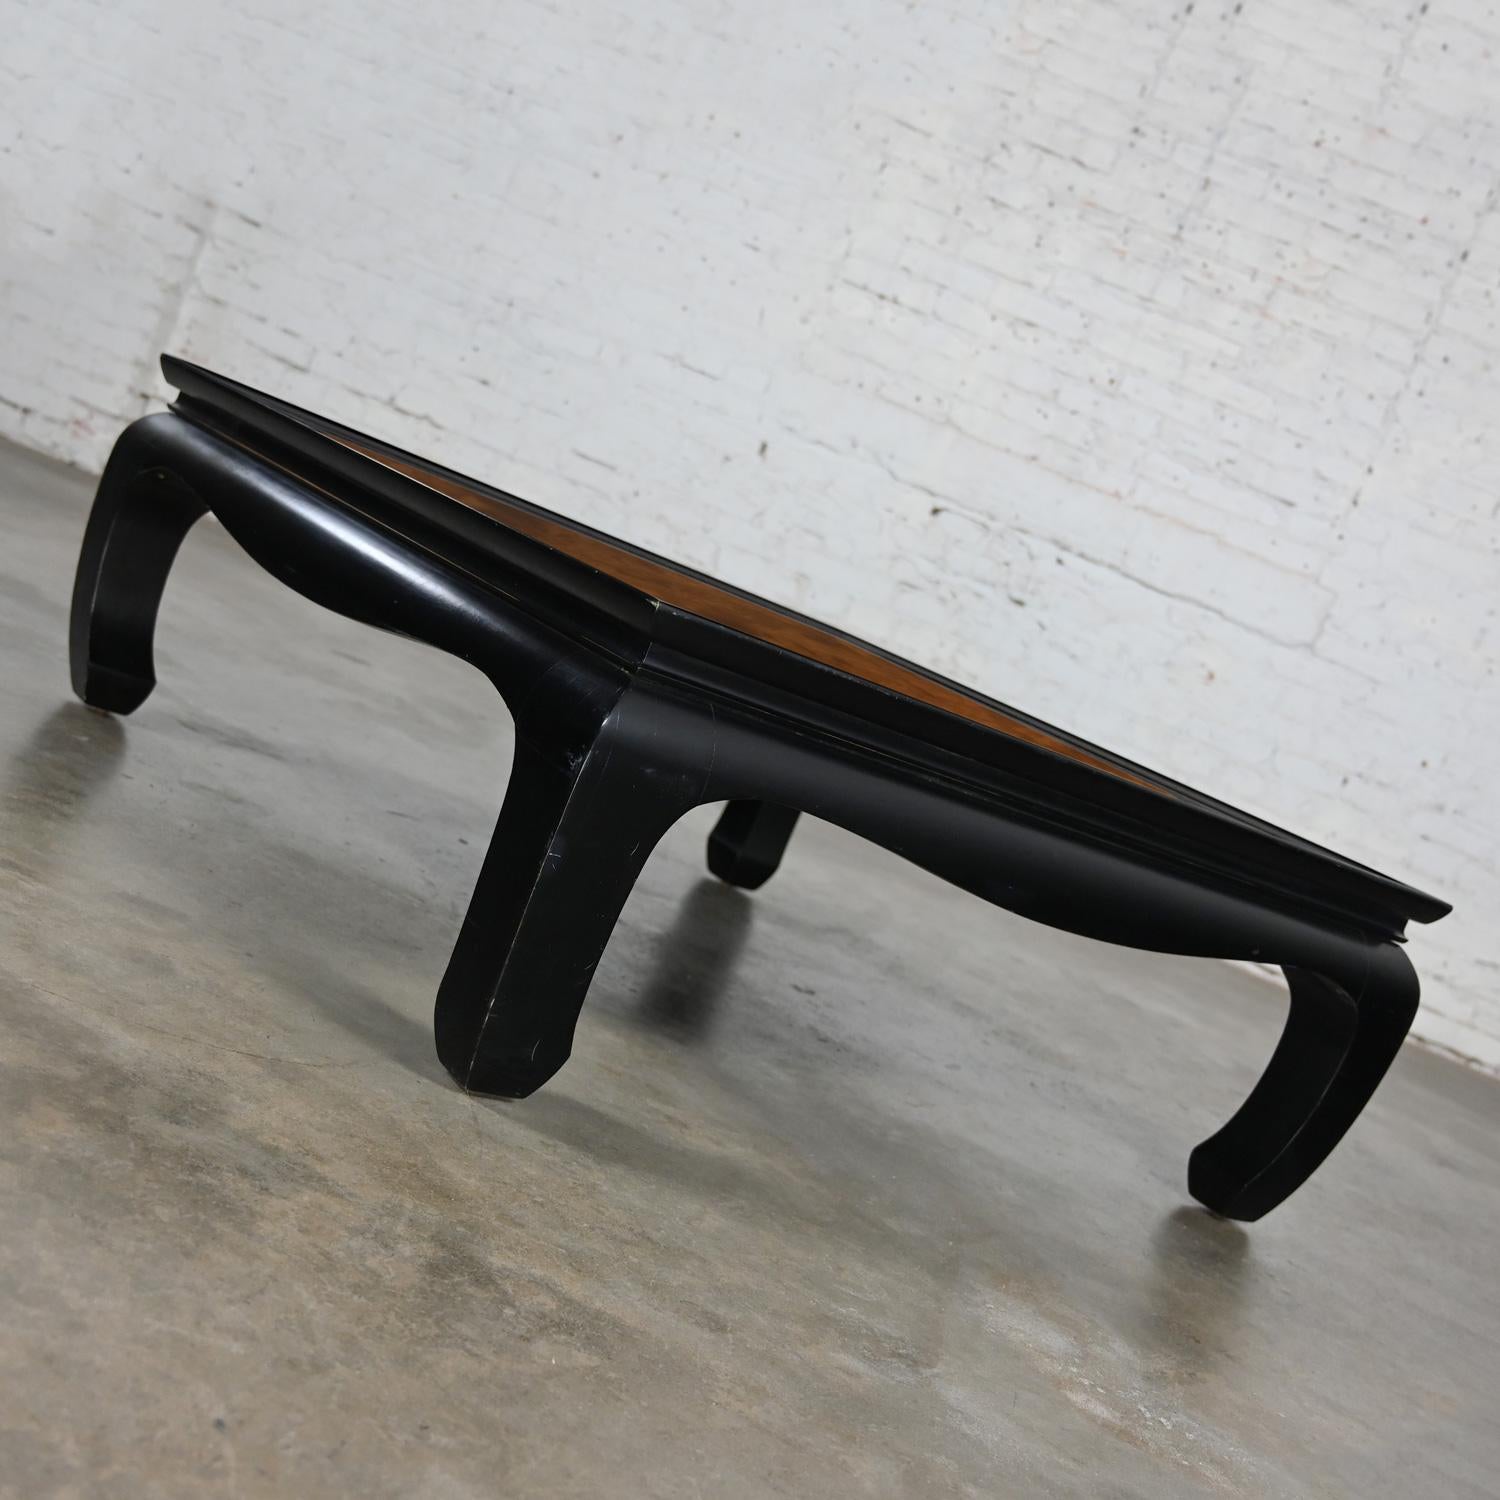 20th Century Ming Style Black & Burl Coffee Table Attributed Chin Hua Collection by Sabota For Sale